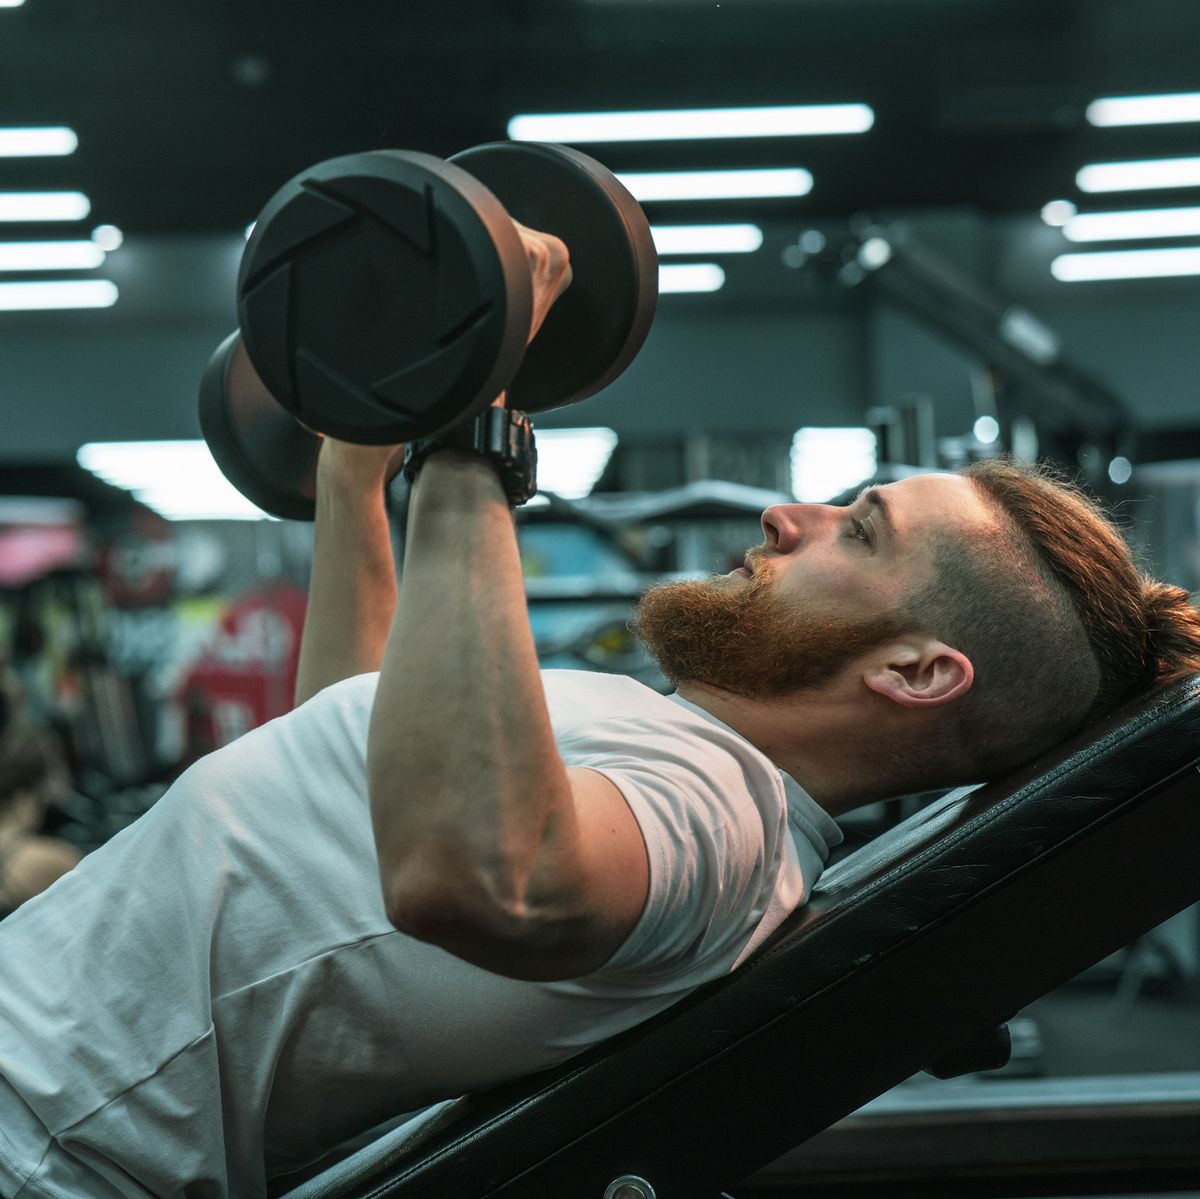 Proper Angle for the Incline Bench Press and How to Do It Safely